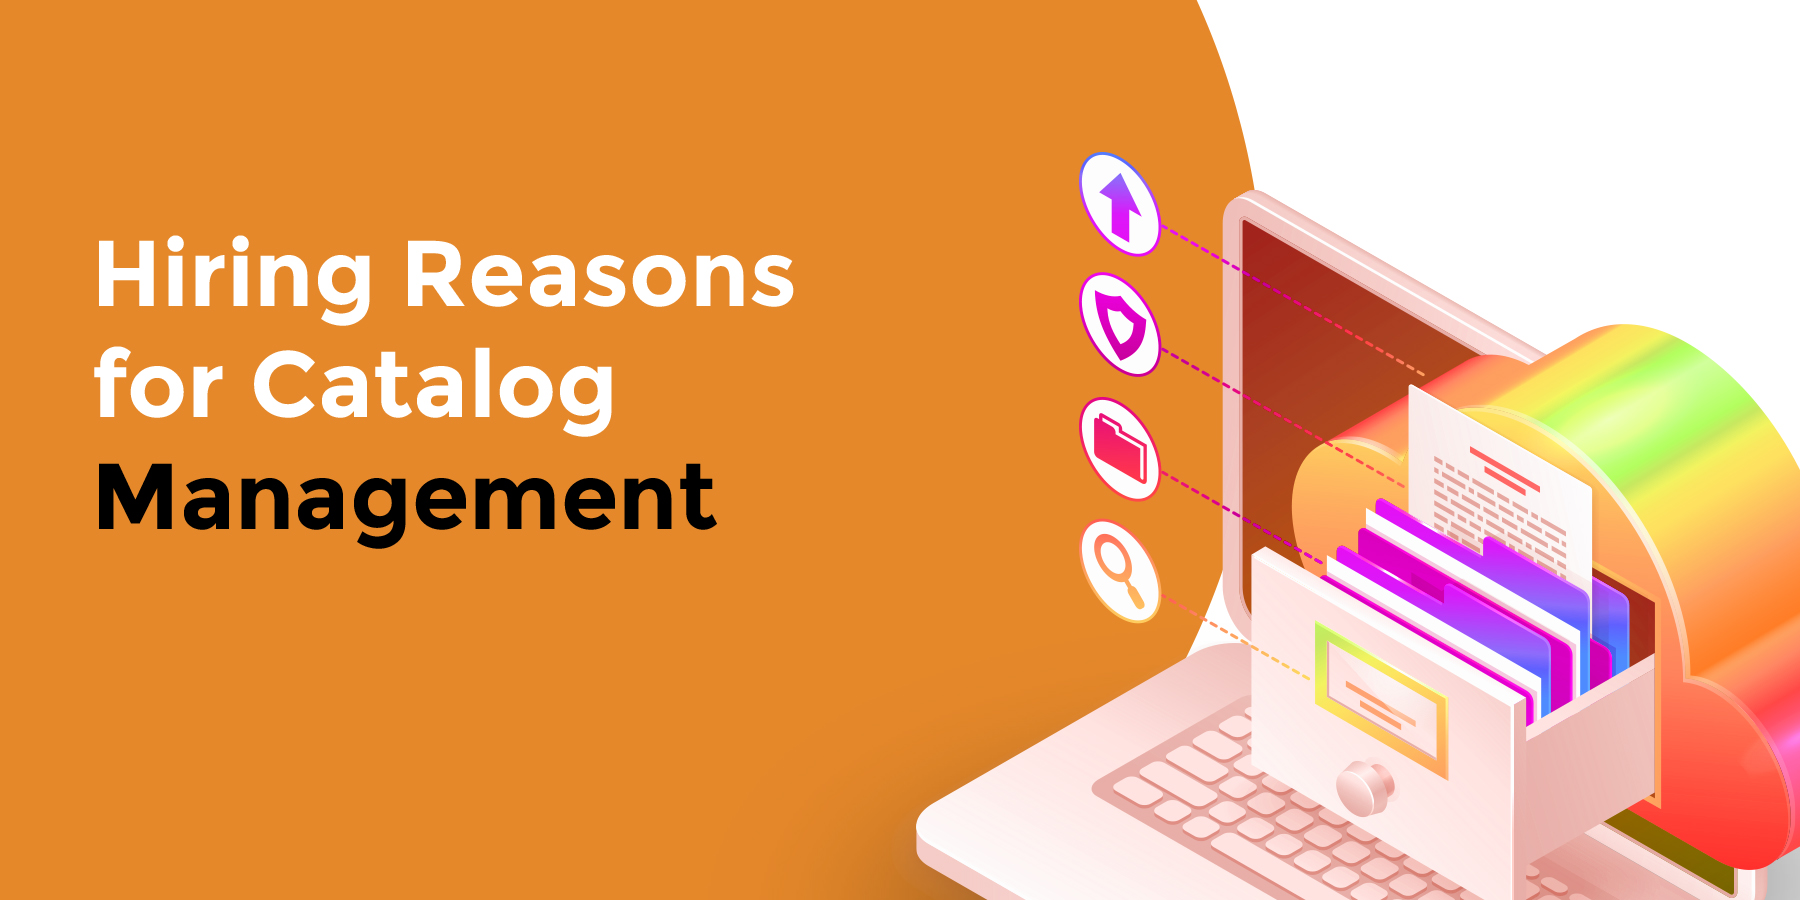 What Are Amazon Catalog Management Services 5 Reasons You Should Hire Amazon Catalog Management Services